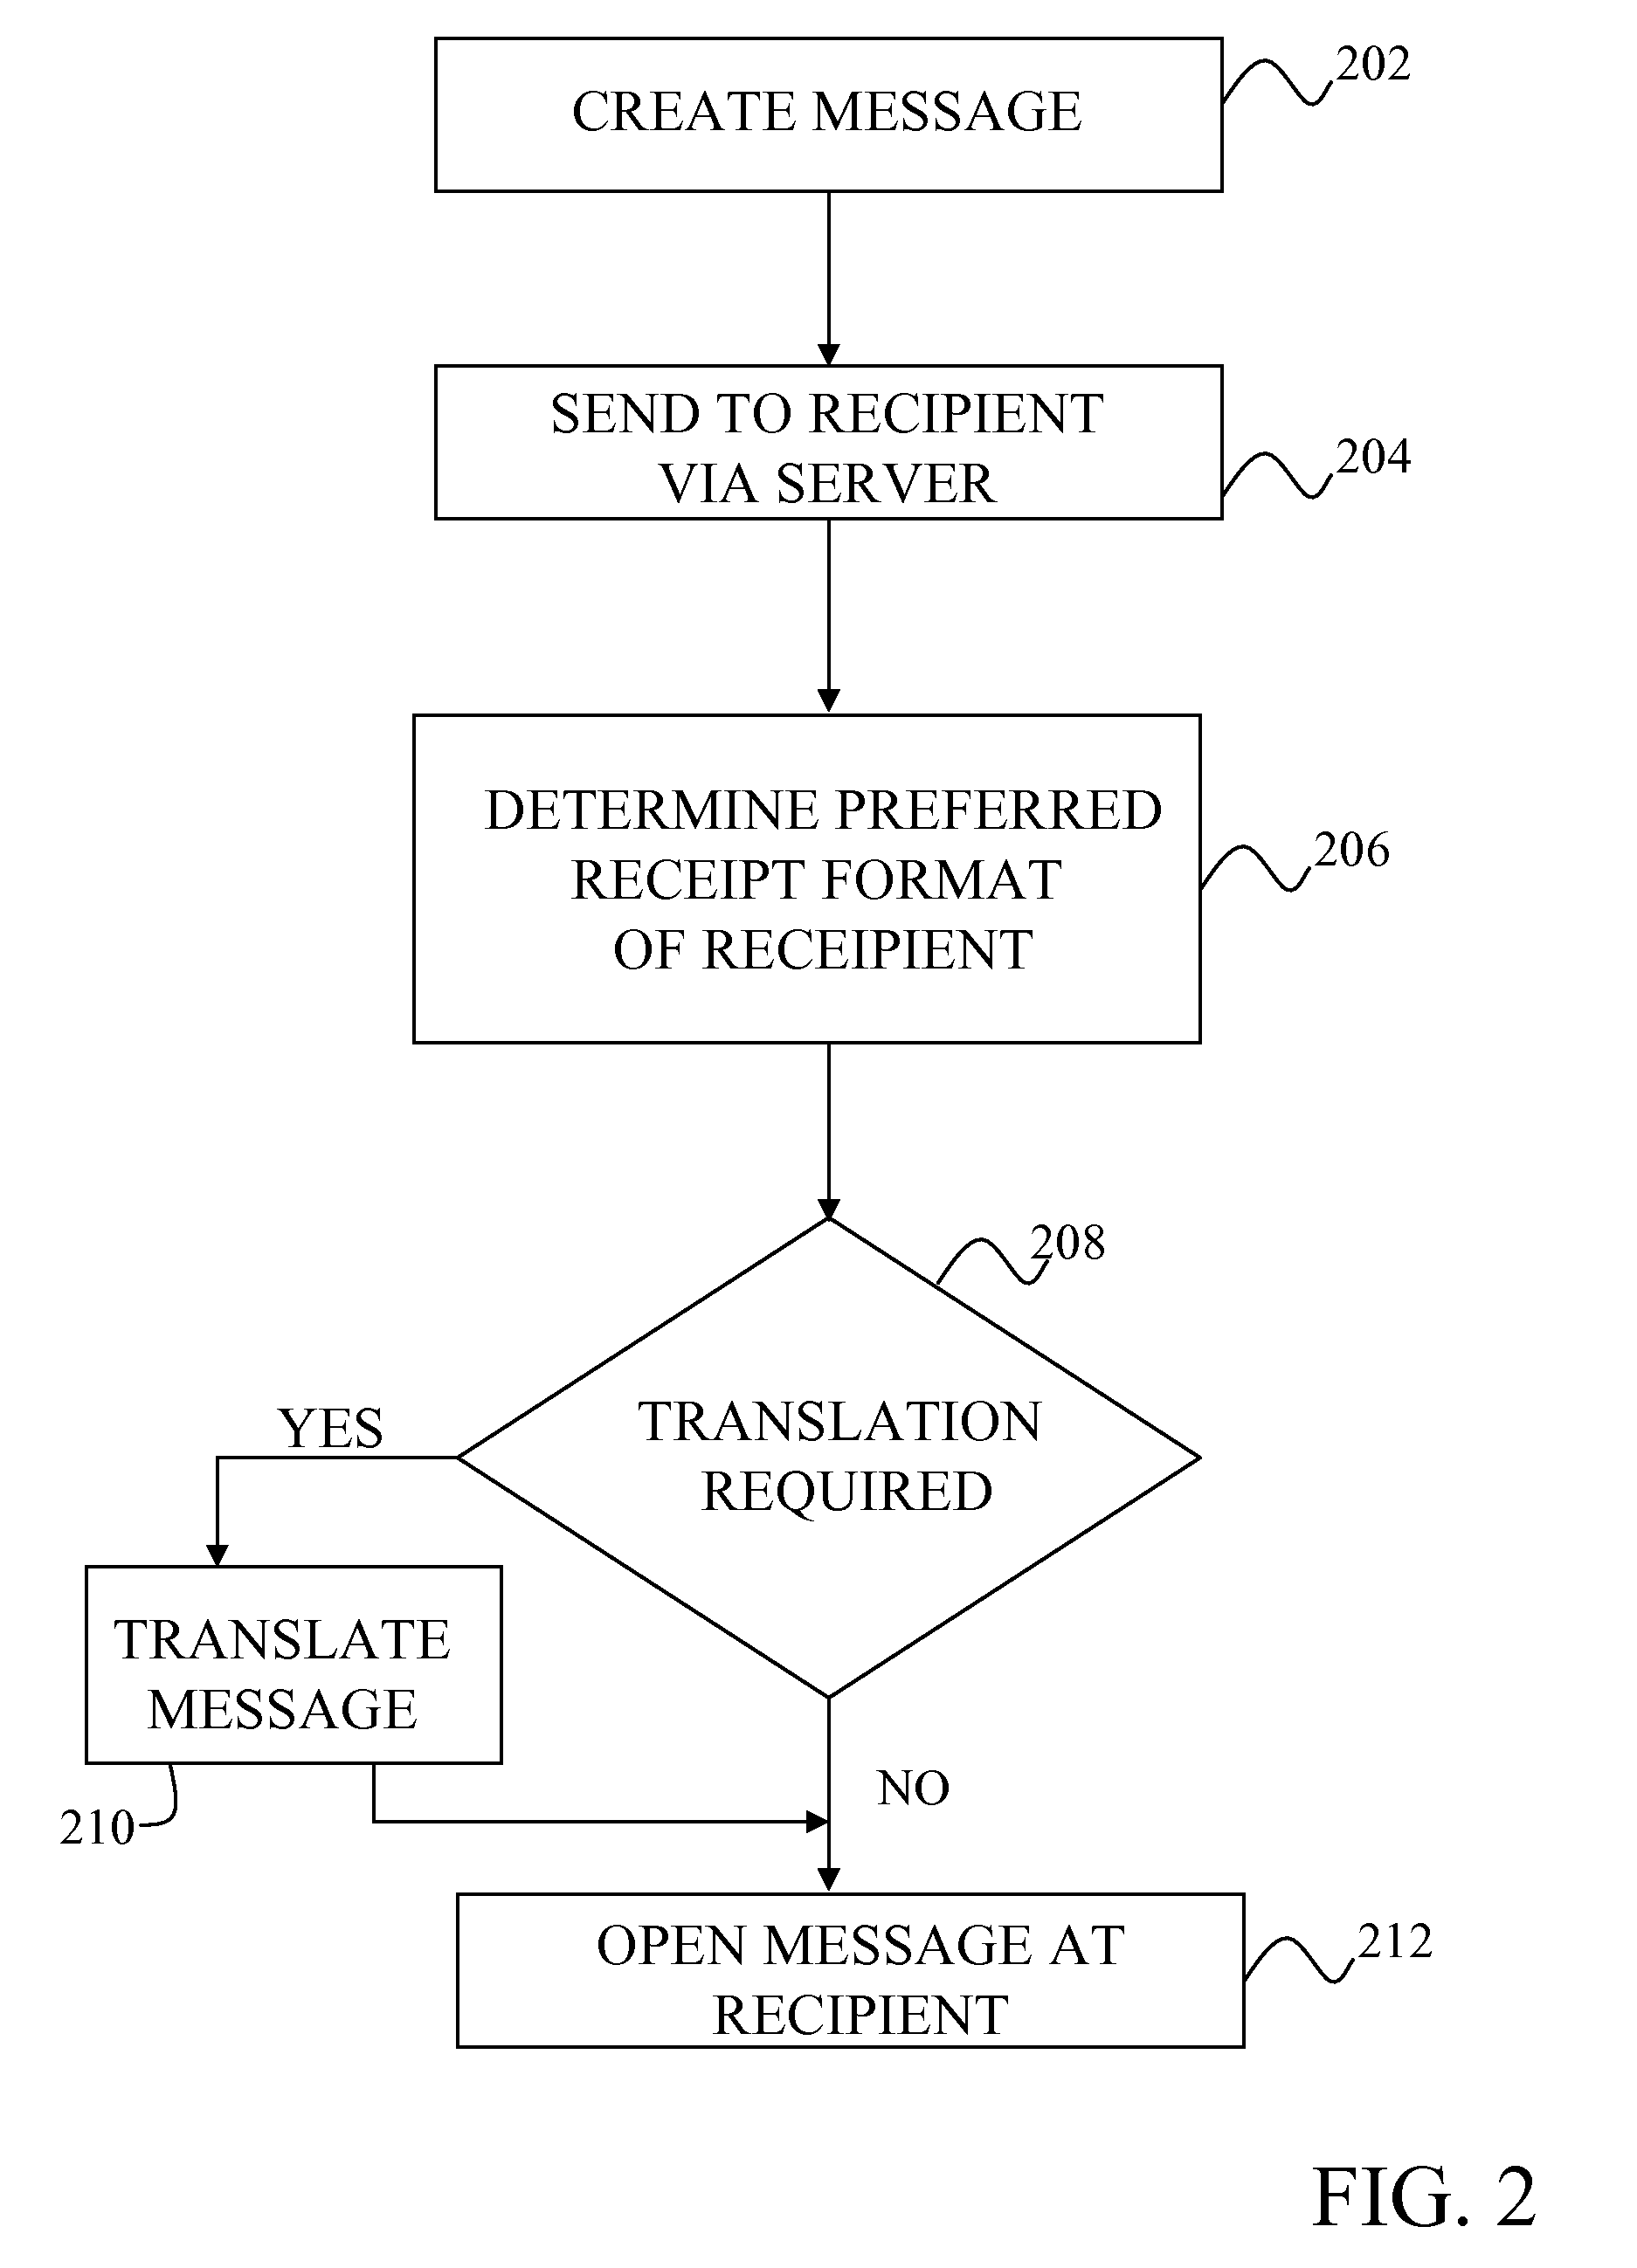 Systems and methods for enabling inter-language communications